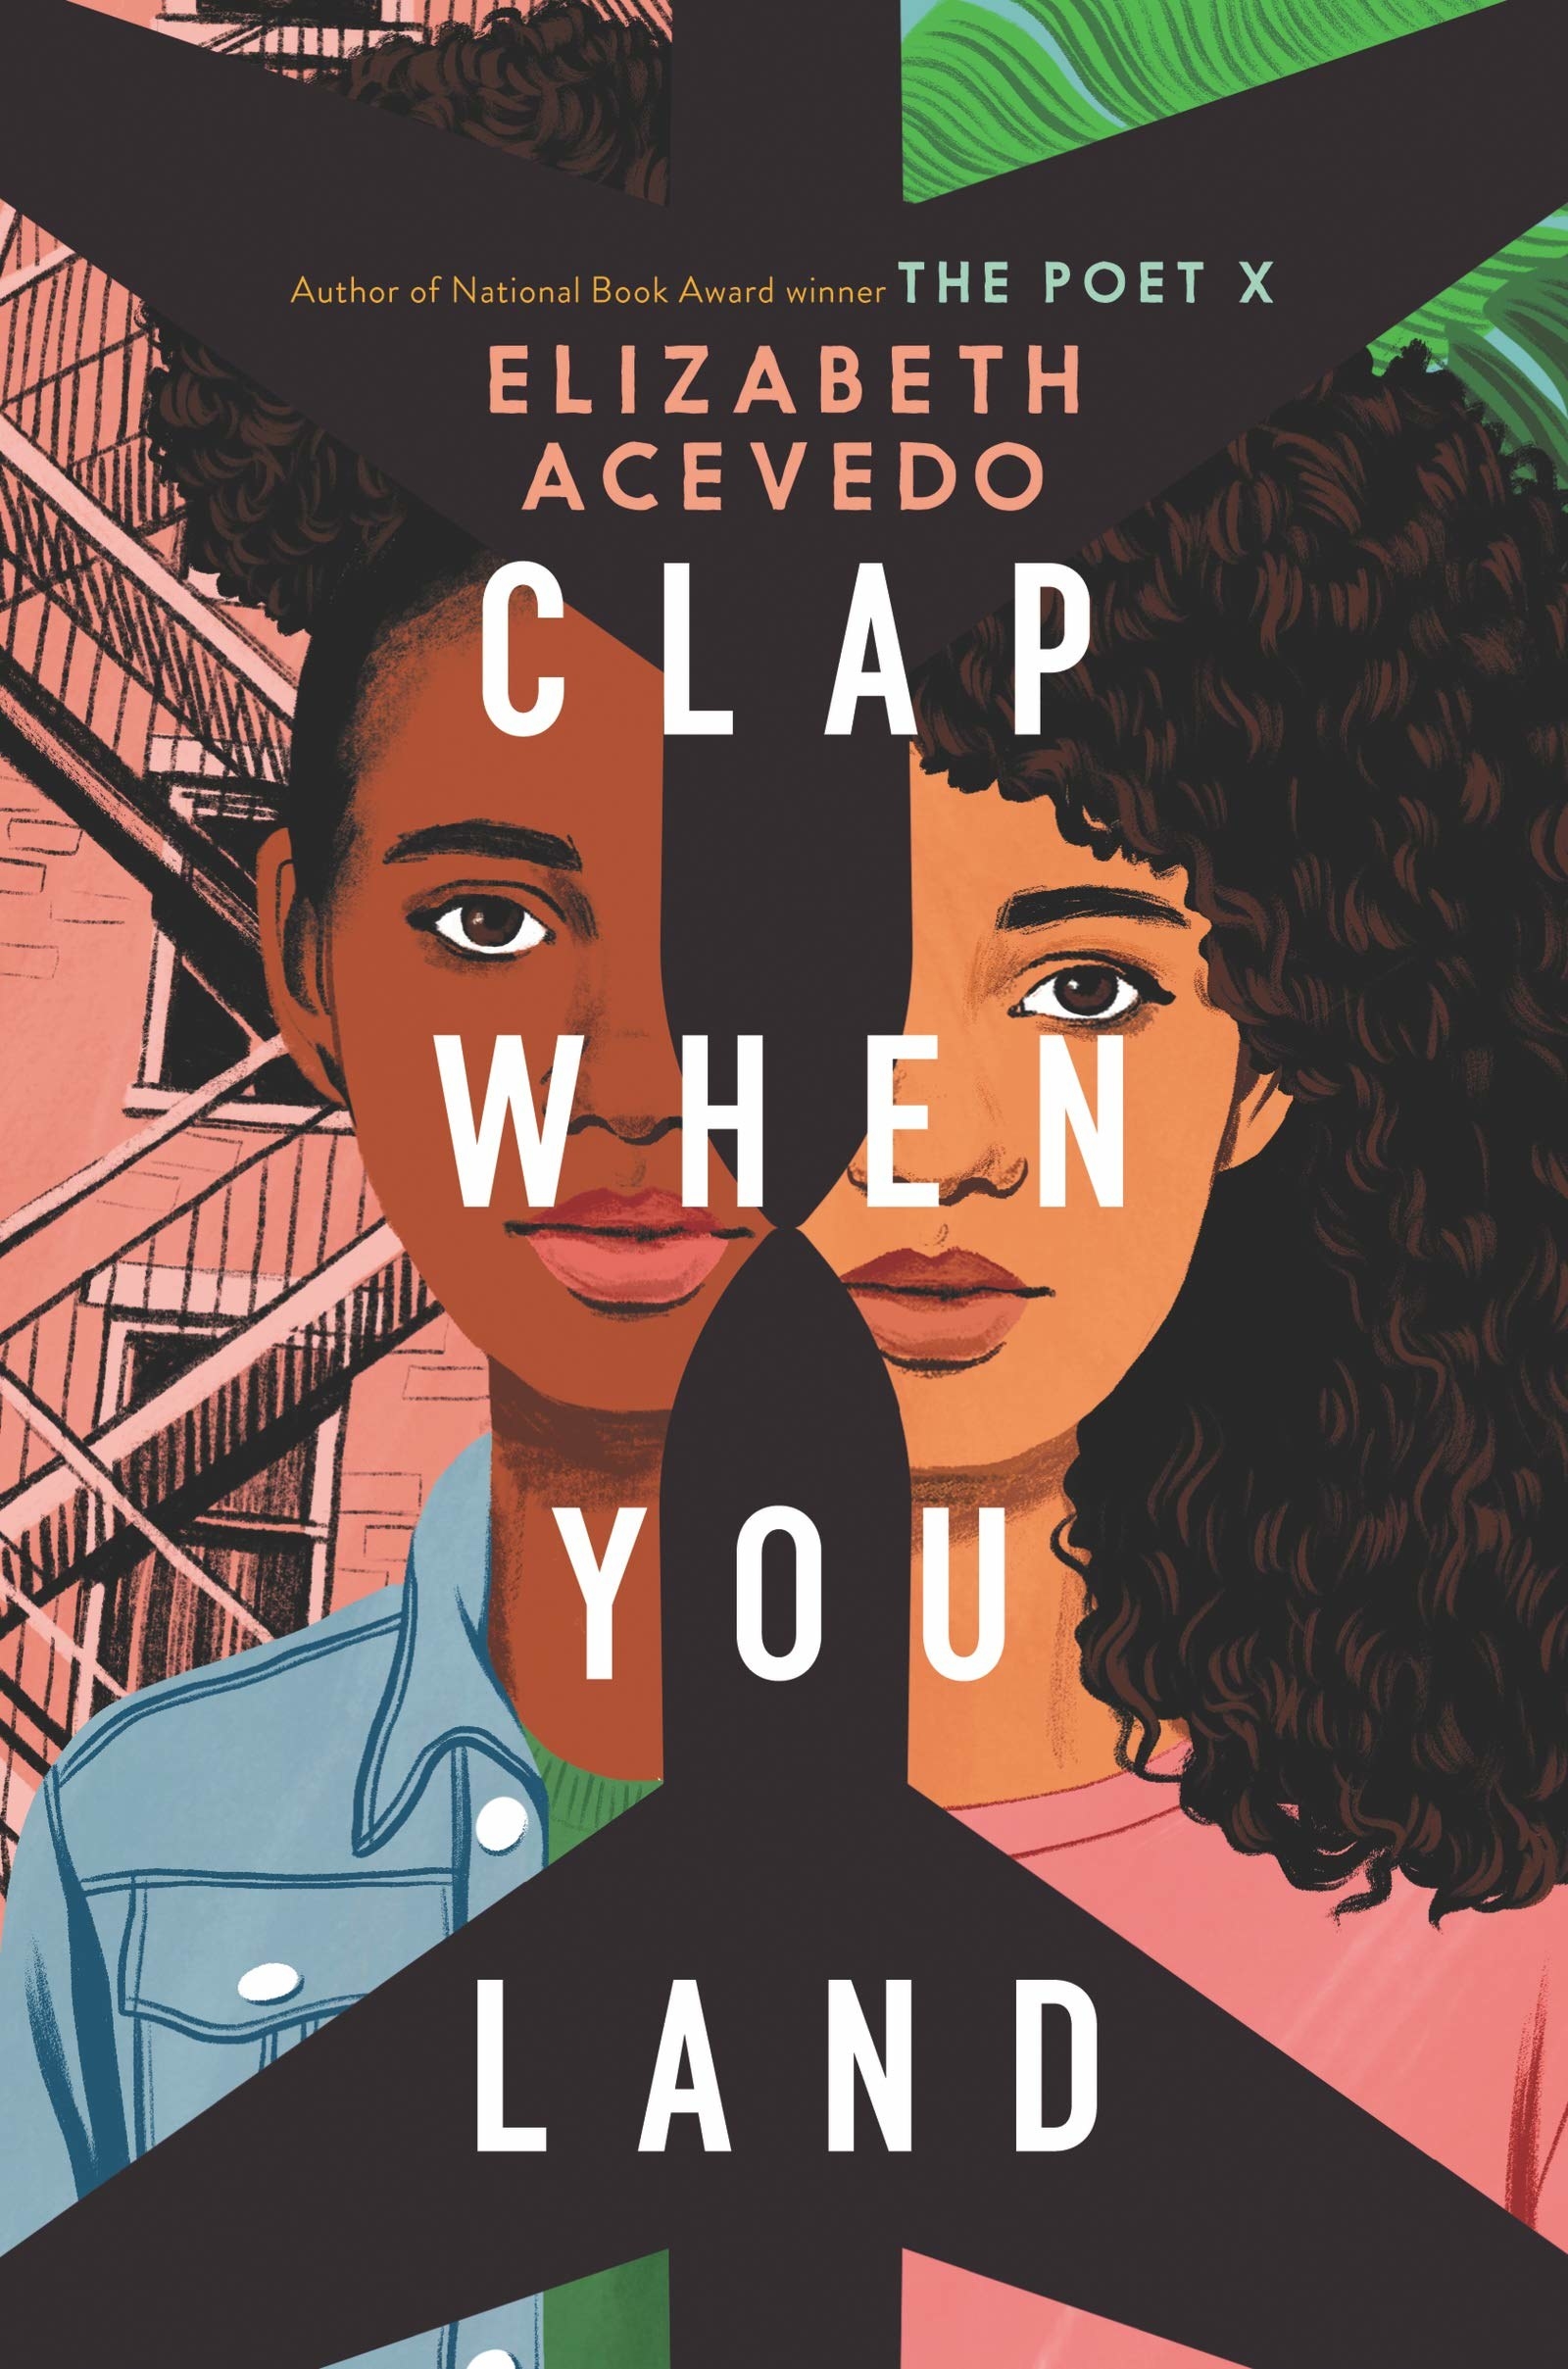 a copy of Clap when you land - two illustrated faces 